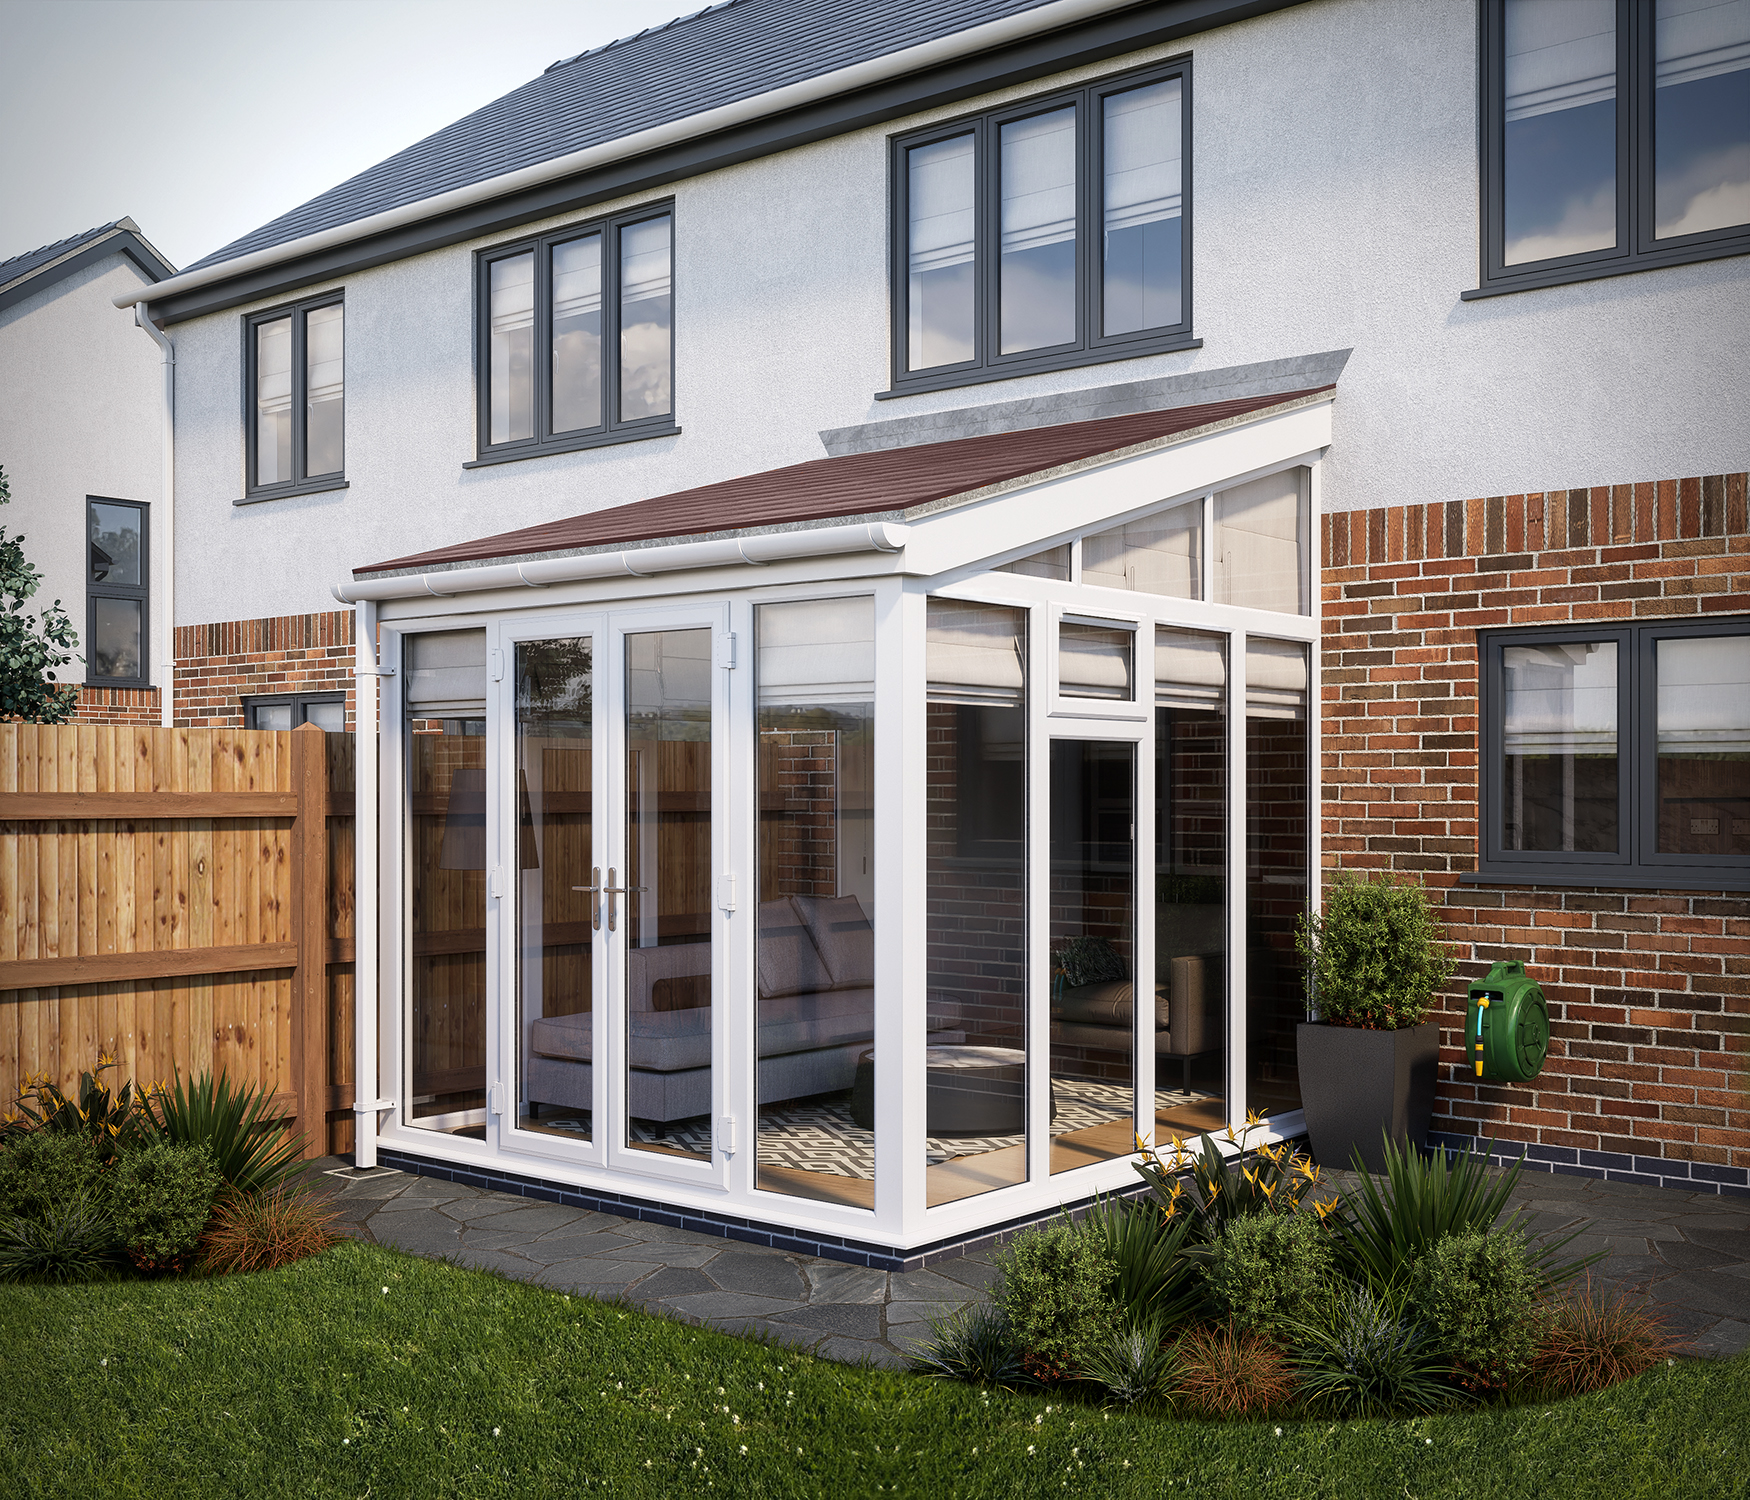 Image of SOLid Roof Full Height Lean to Conservatory White Frames with Rustic Brown Tiles - 13 x 13ft